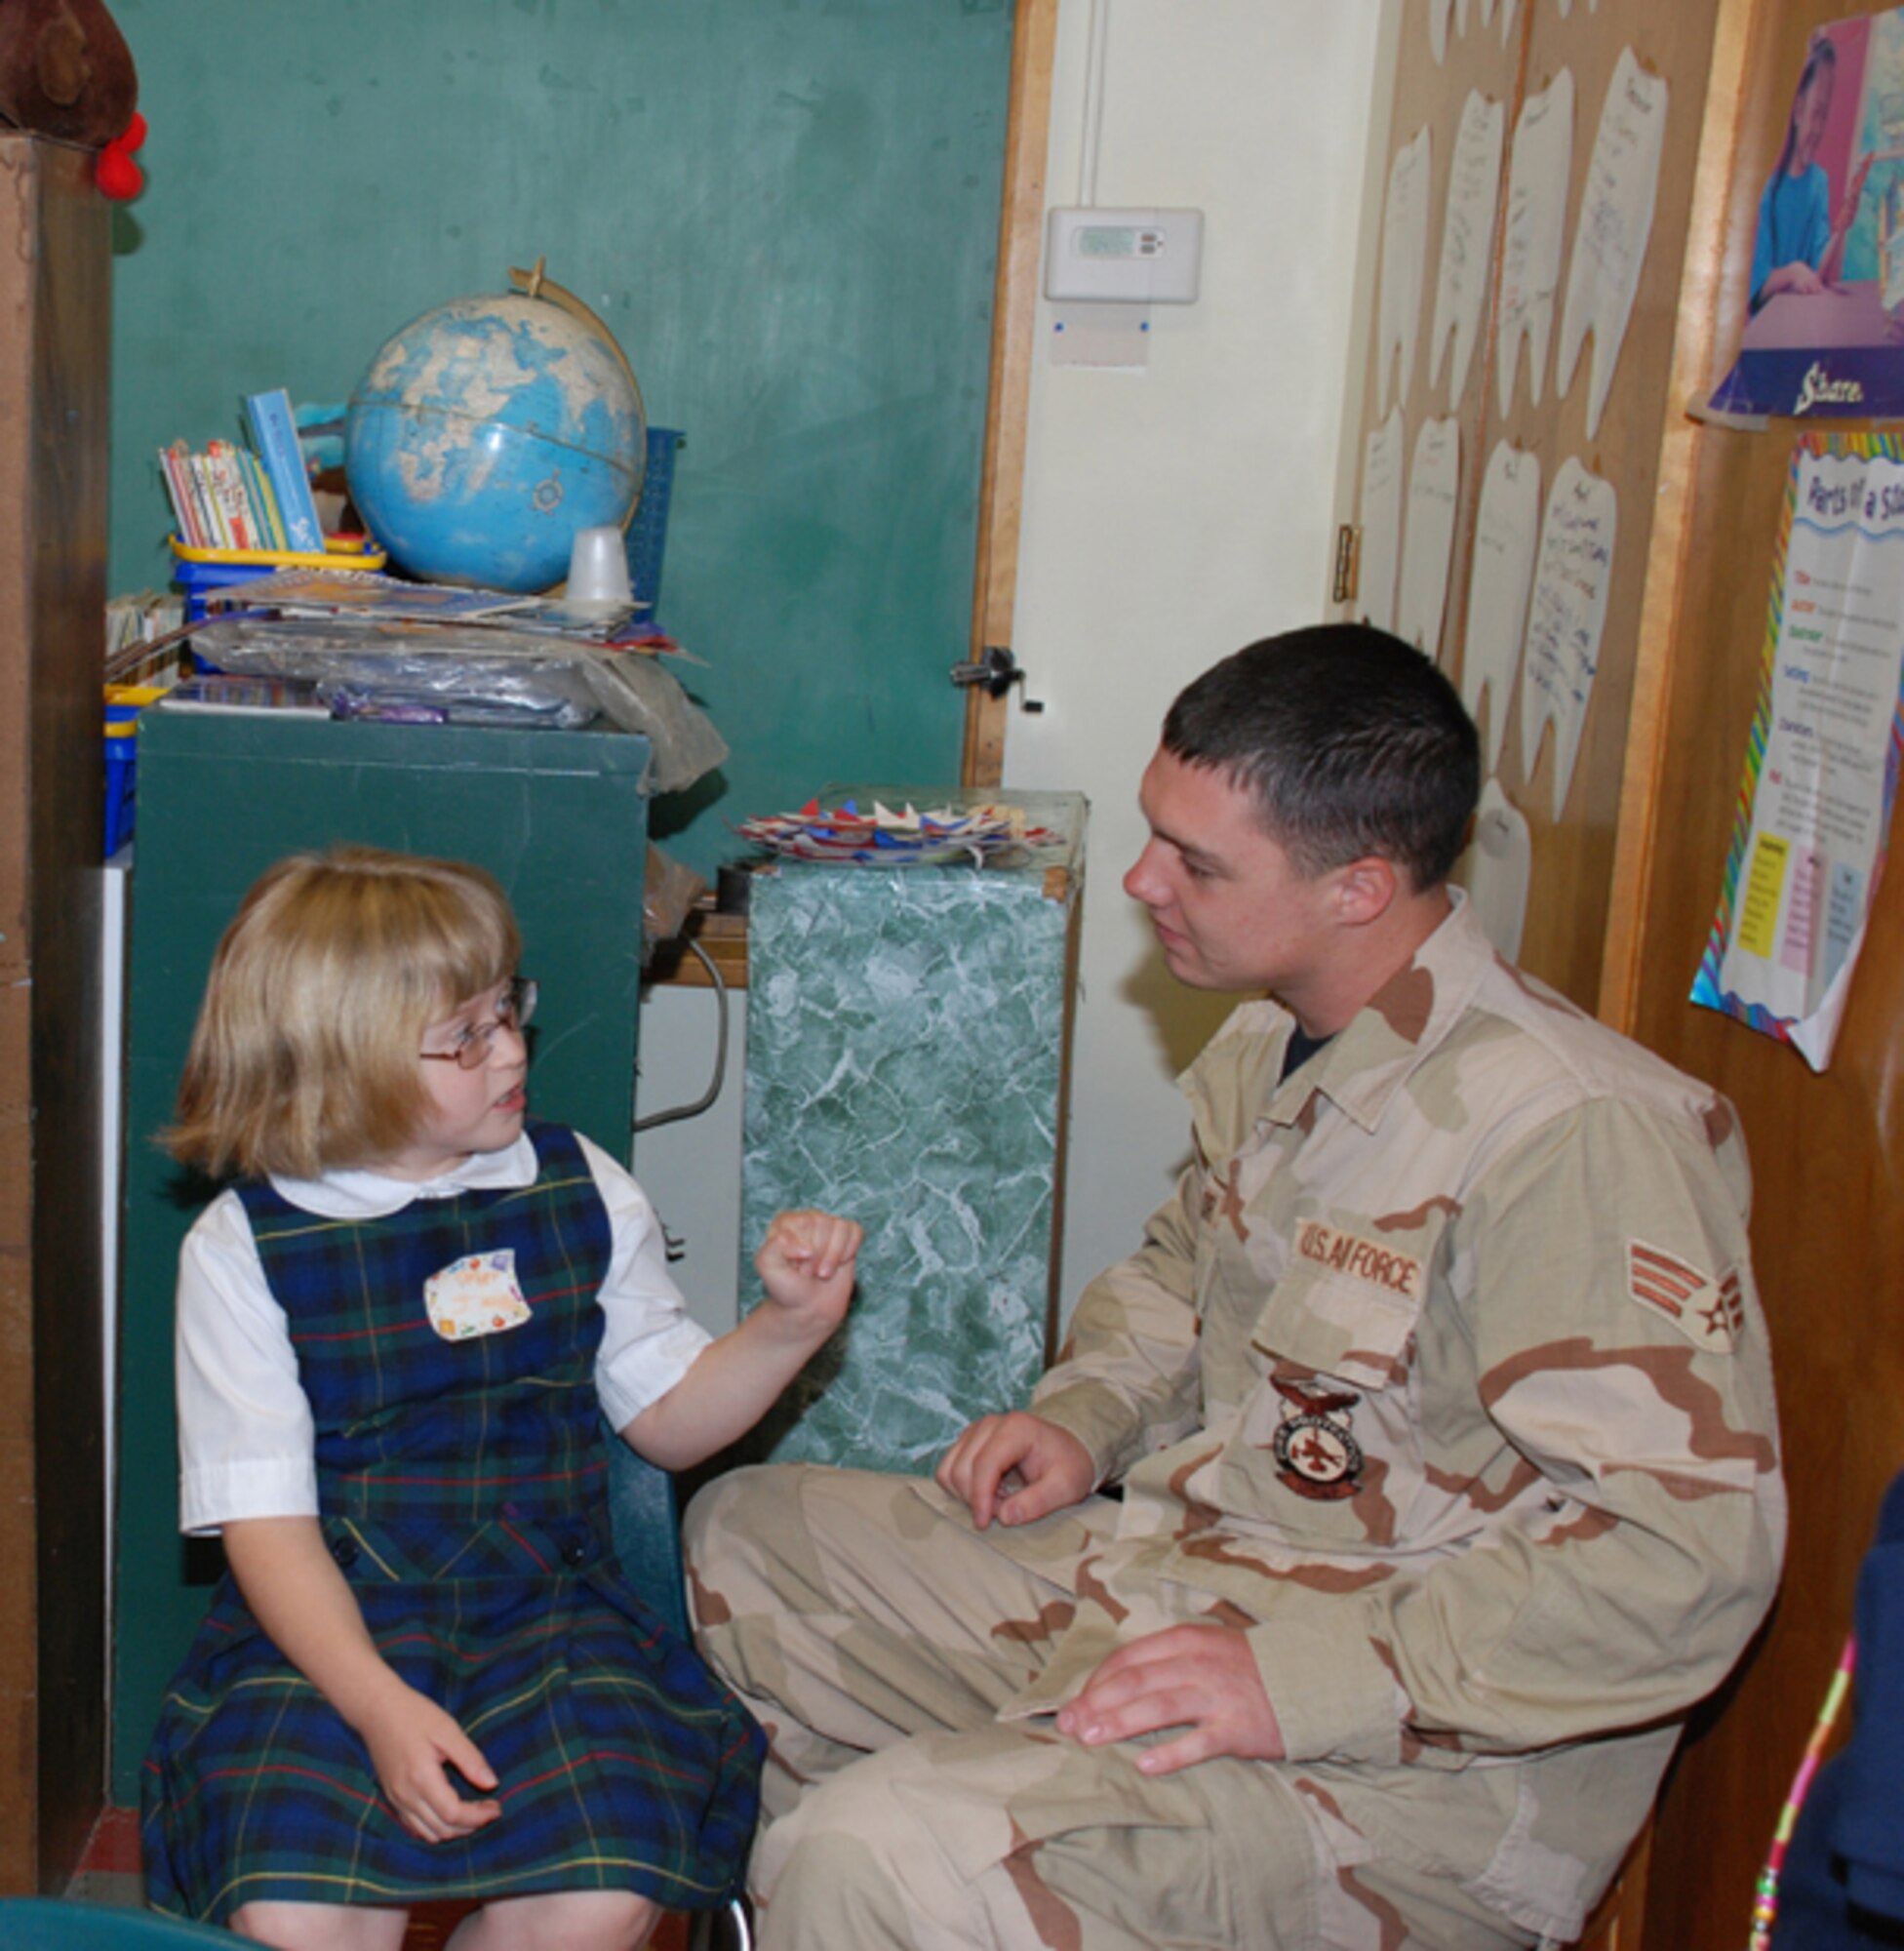 Senior Airman John Baylor, 107th AW firefighter, talks to one of his pen pals inside her second grade classroom.  Baylor corresponded with four students from St. Christophers Elementary School while he was serving in Iraq.